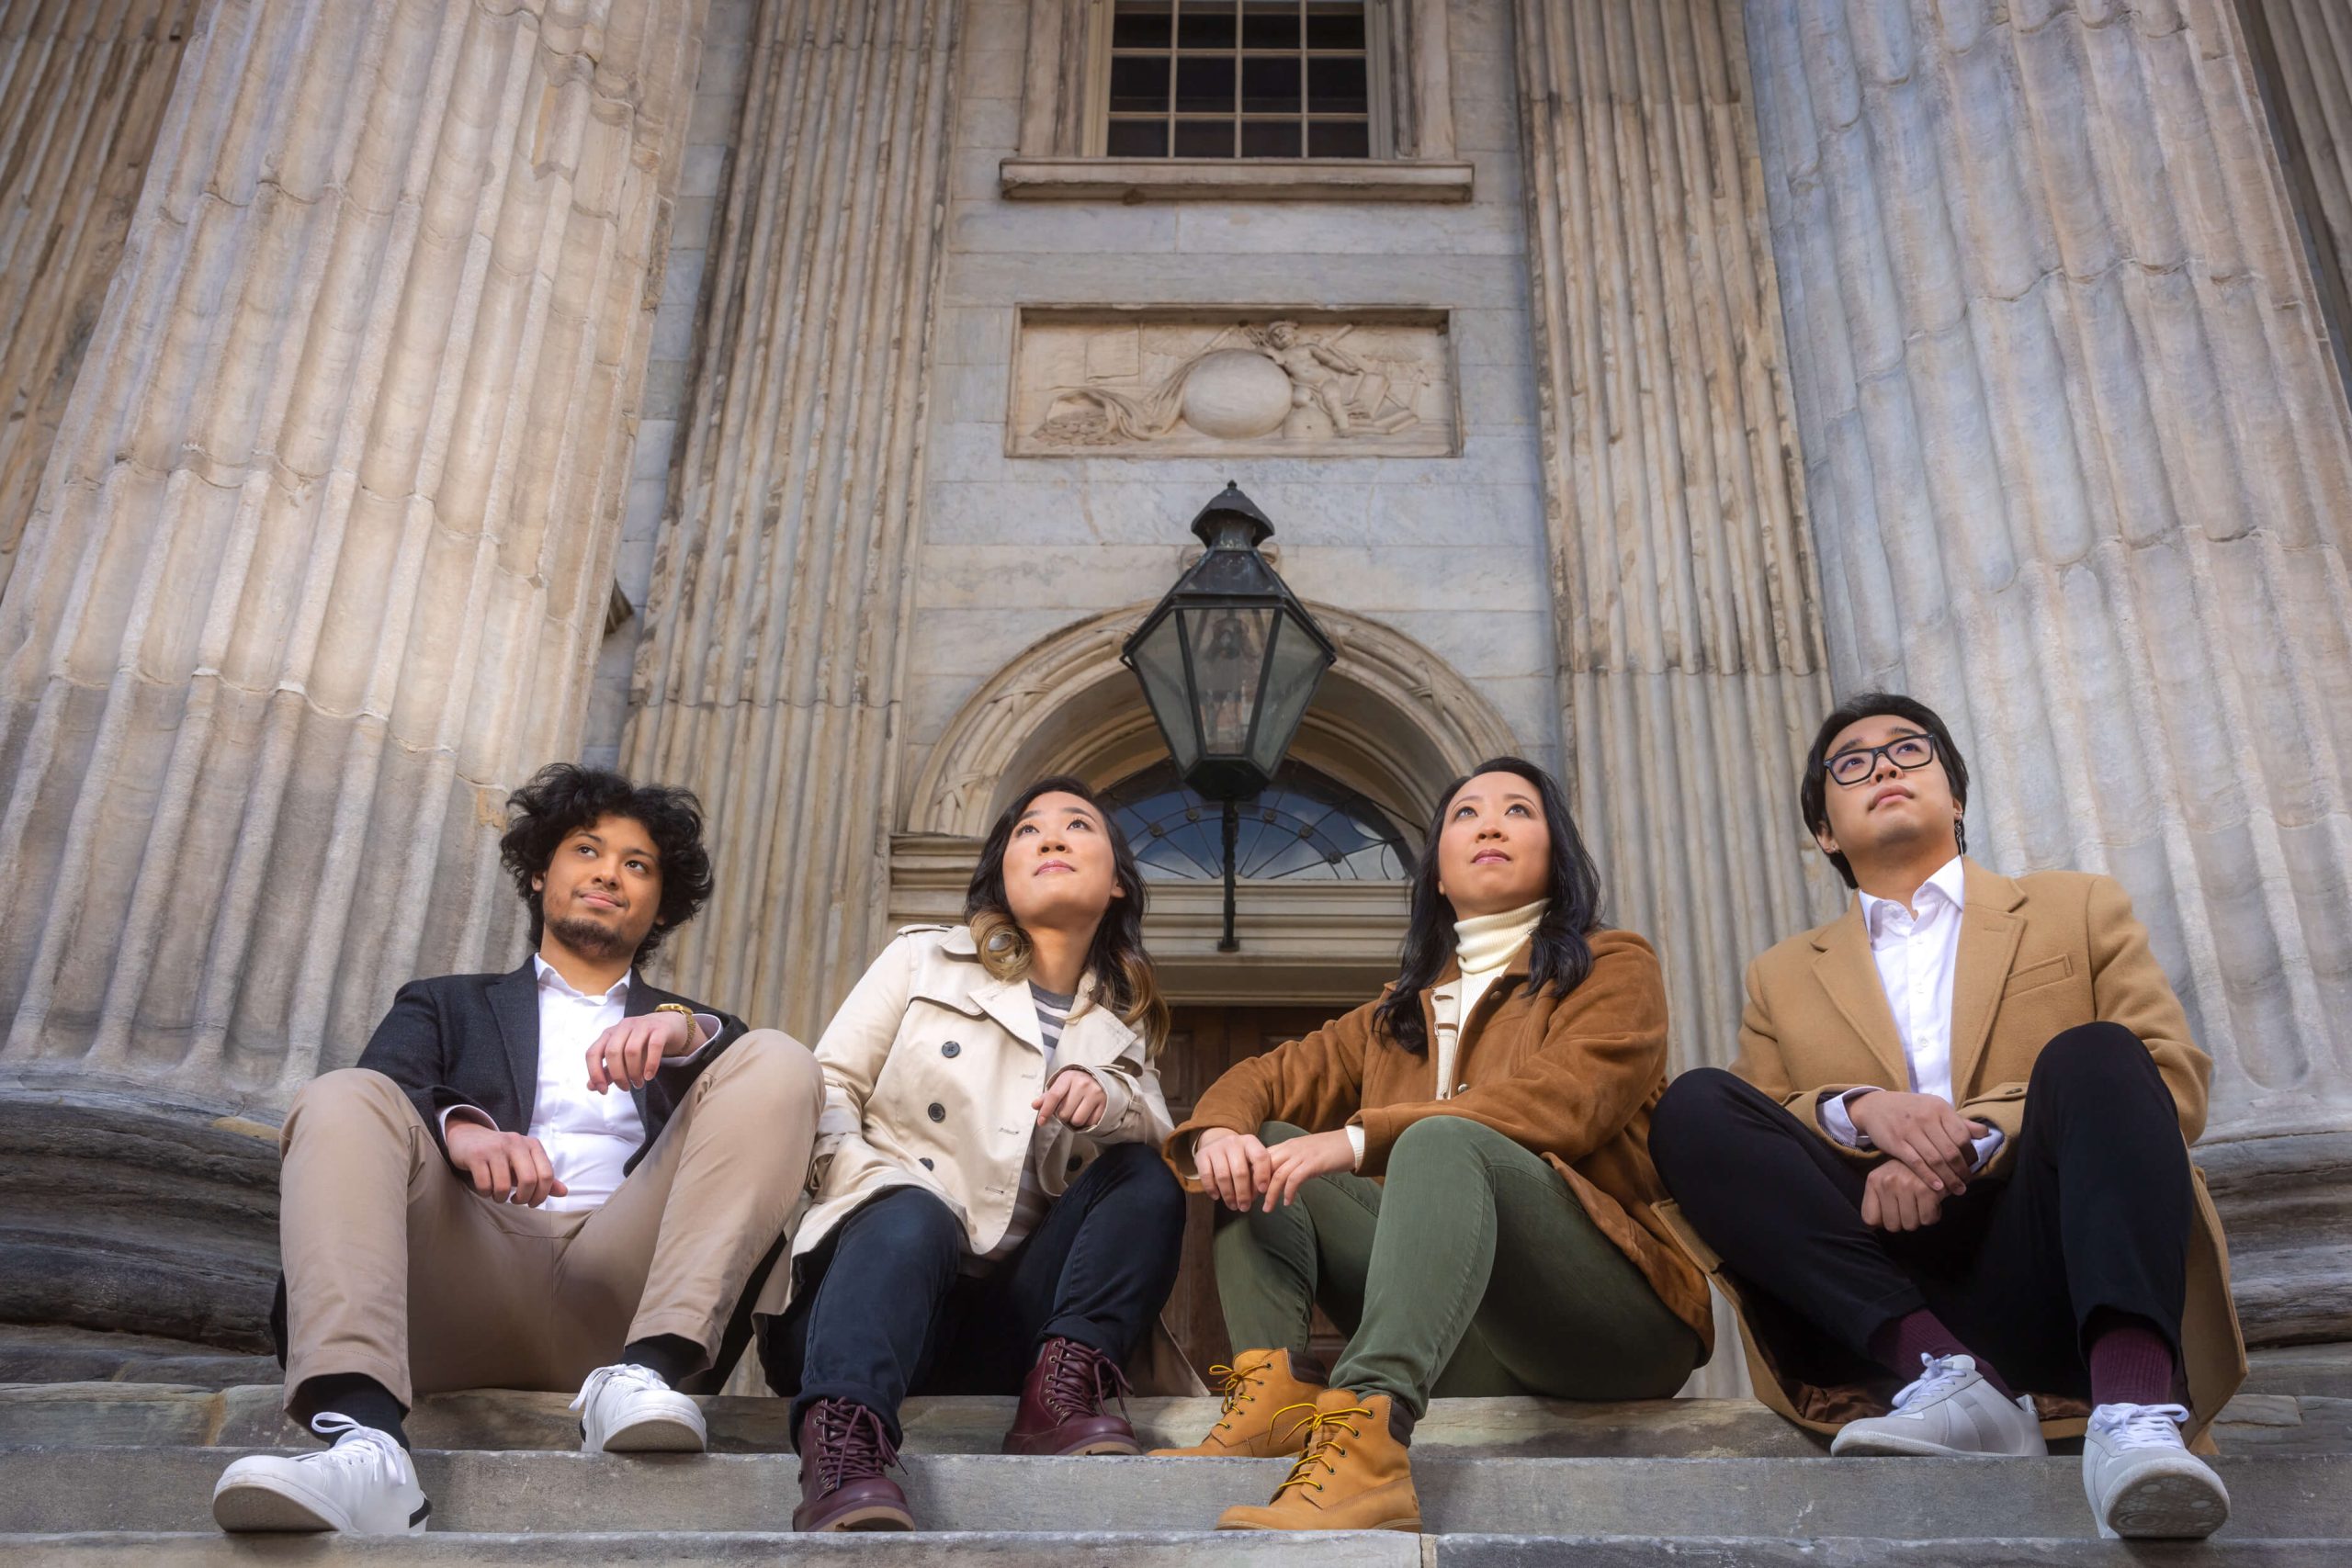 four people sitting at steps of historic American building